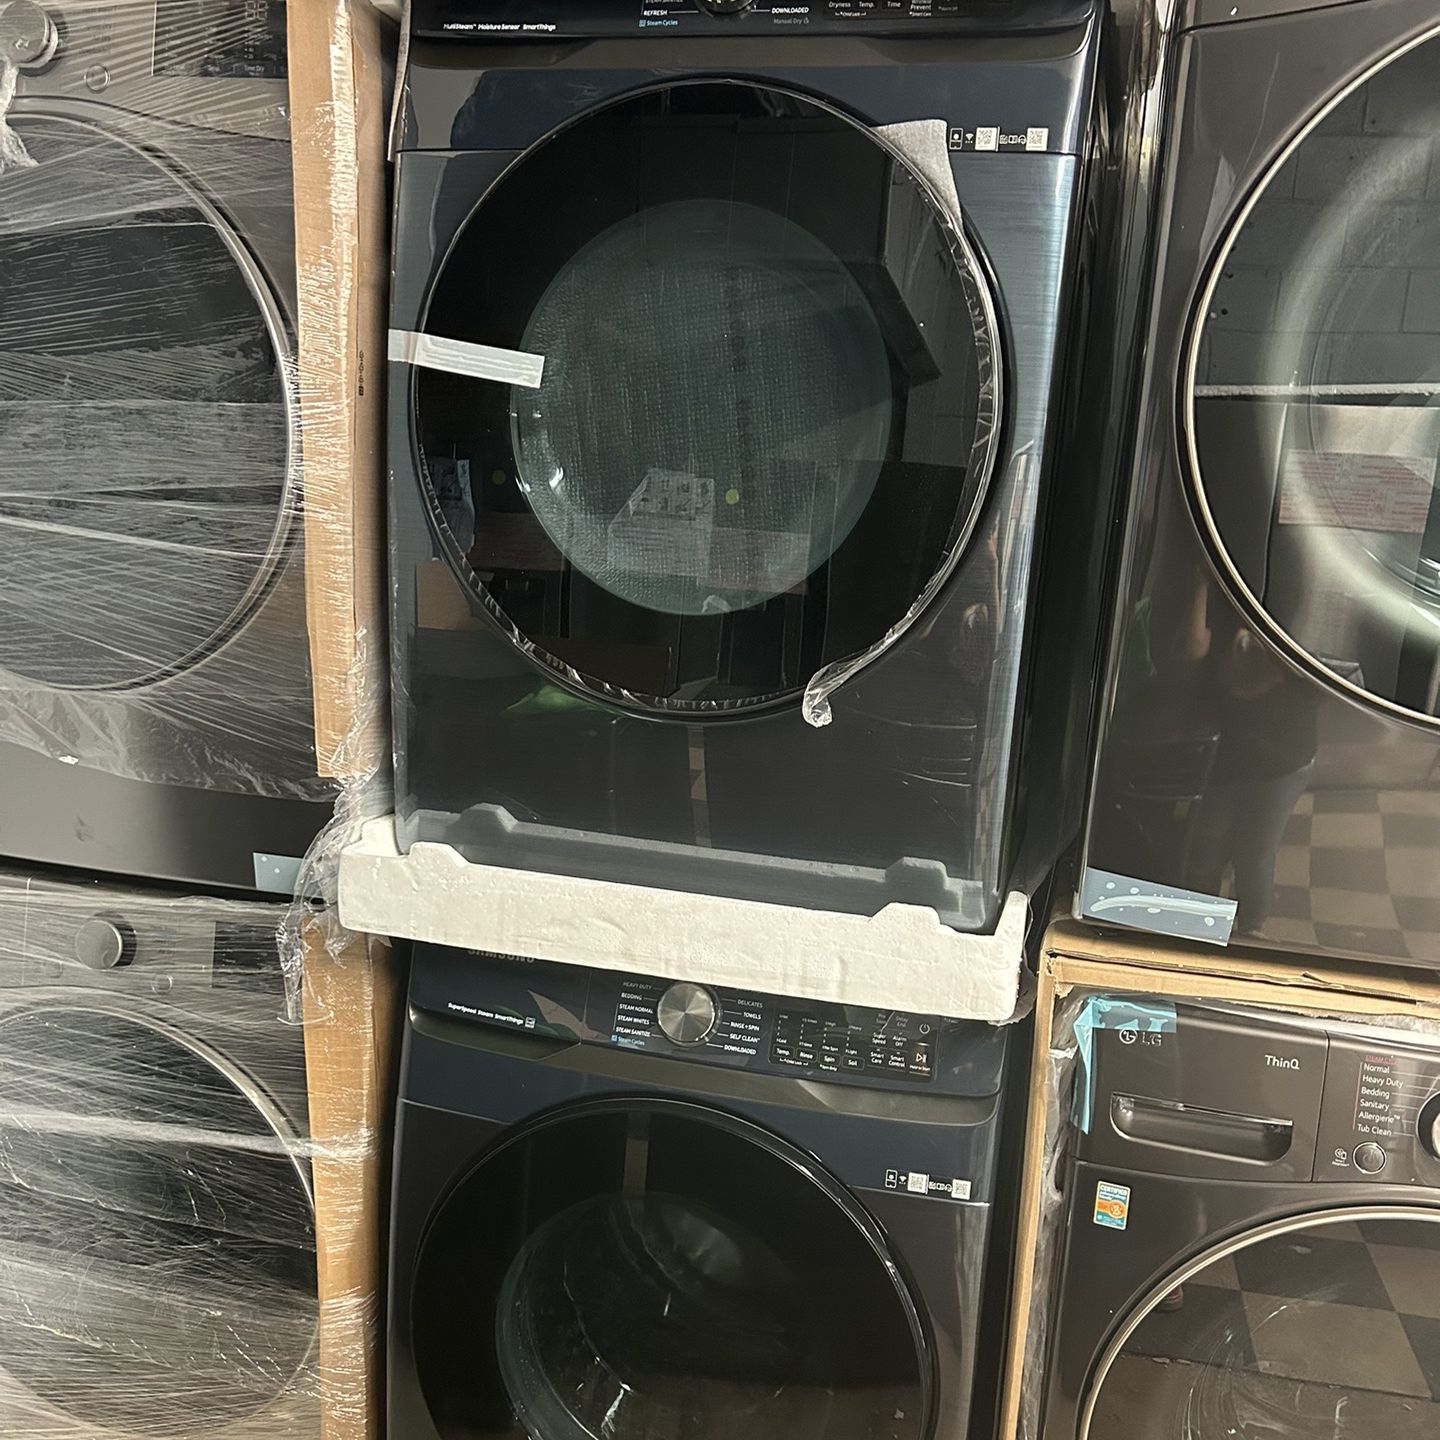 New Samsung Smart High Efficiency Front load Washer And Dryer Set 